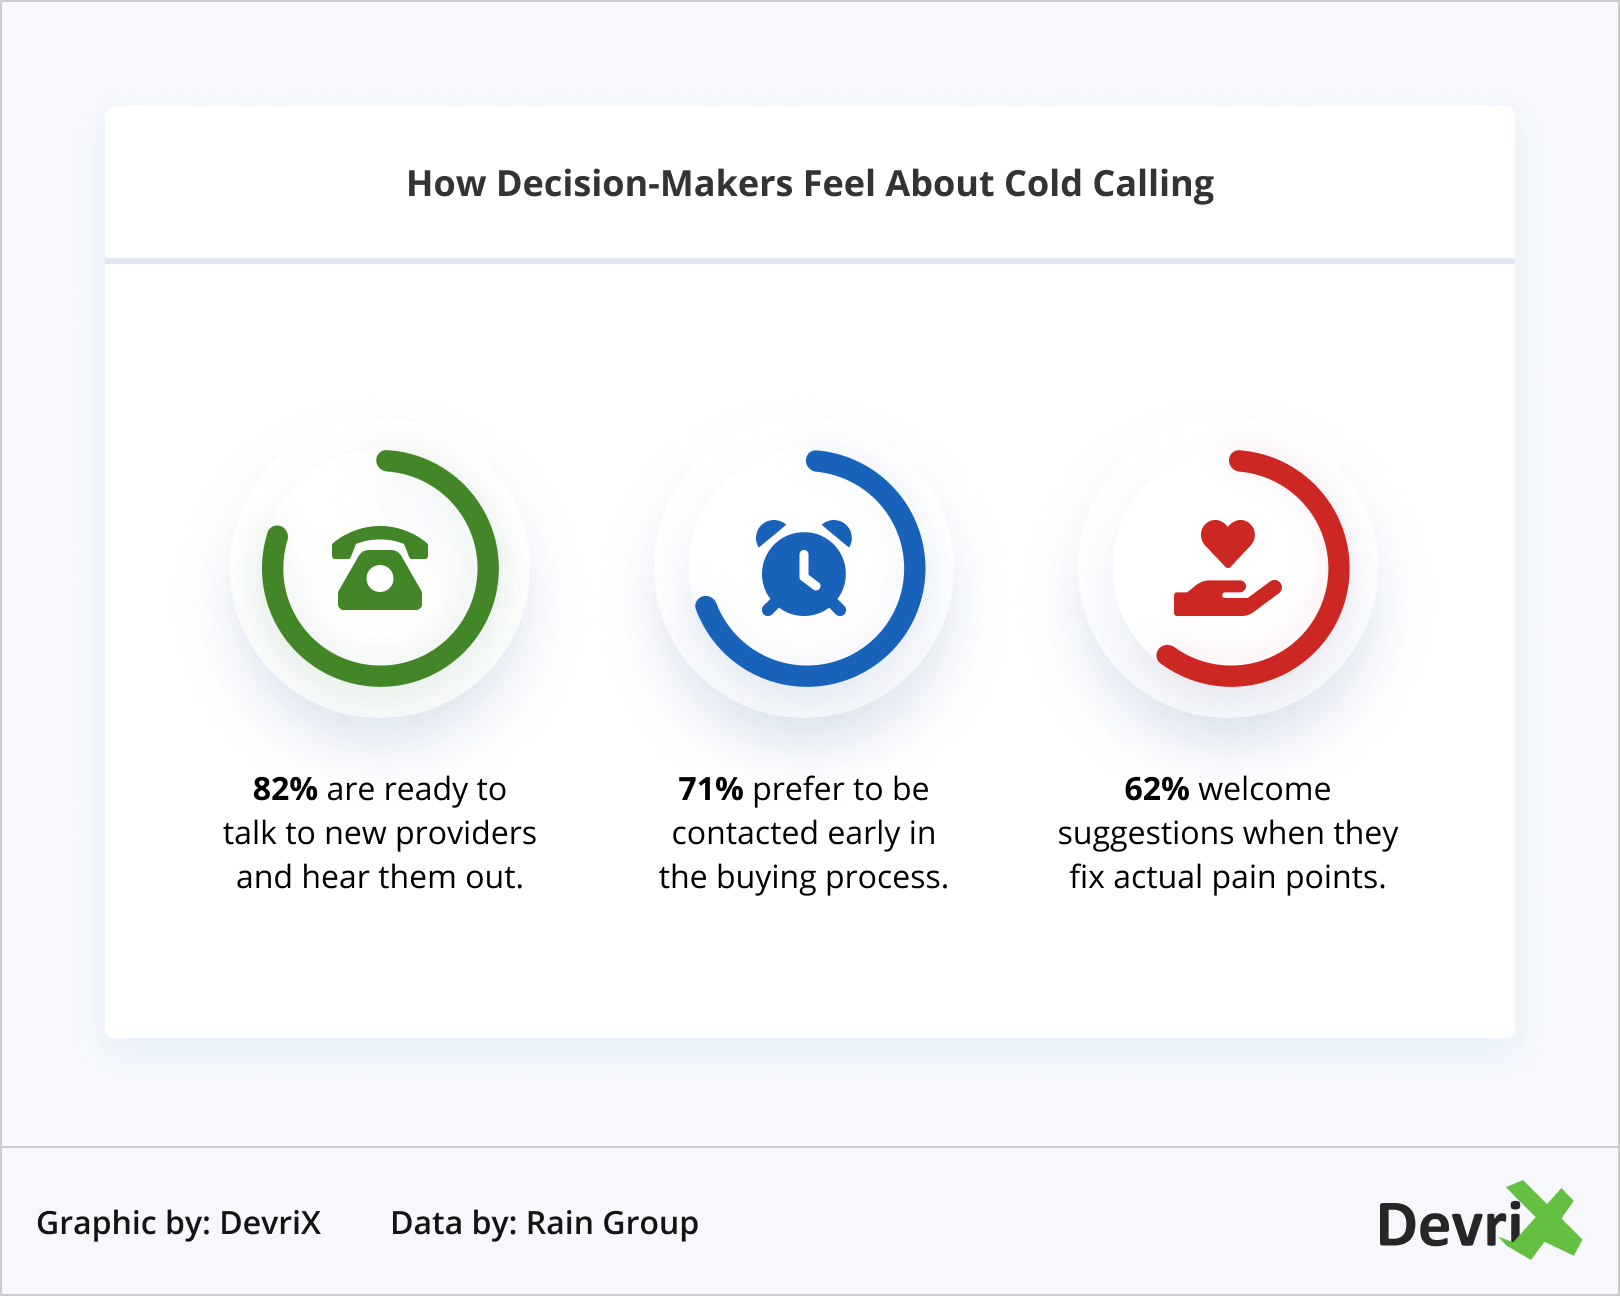 How Decision-Makers Feel About Cold Calling